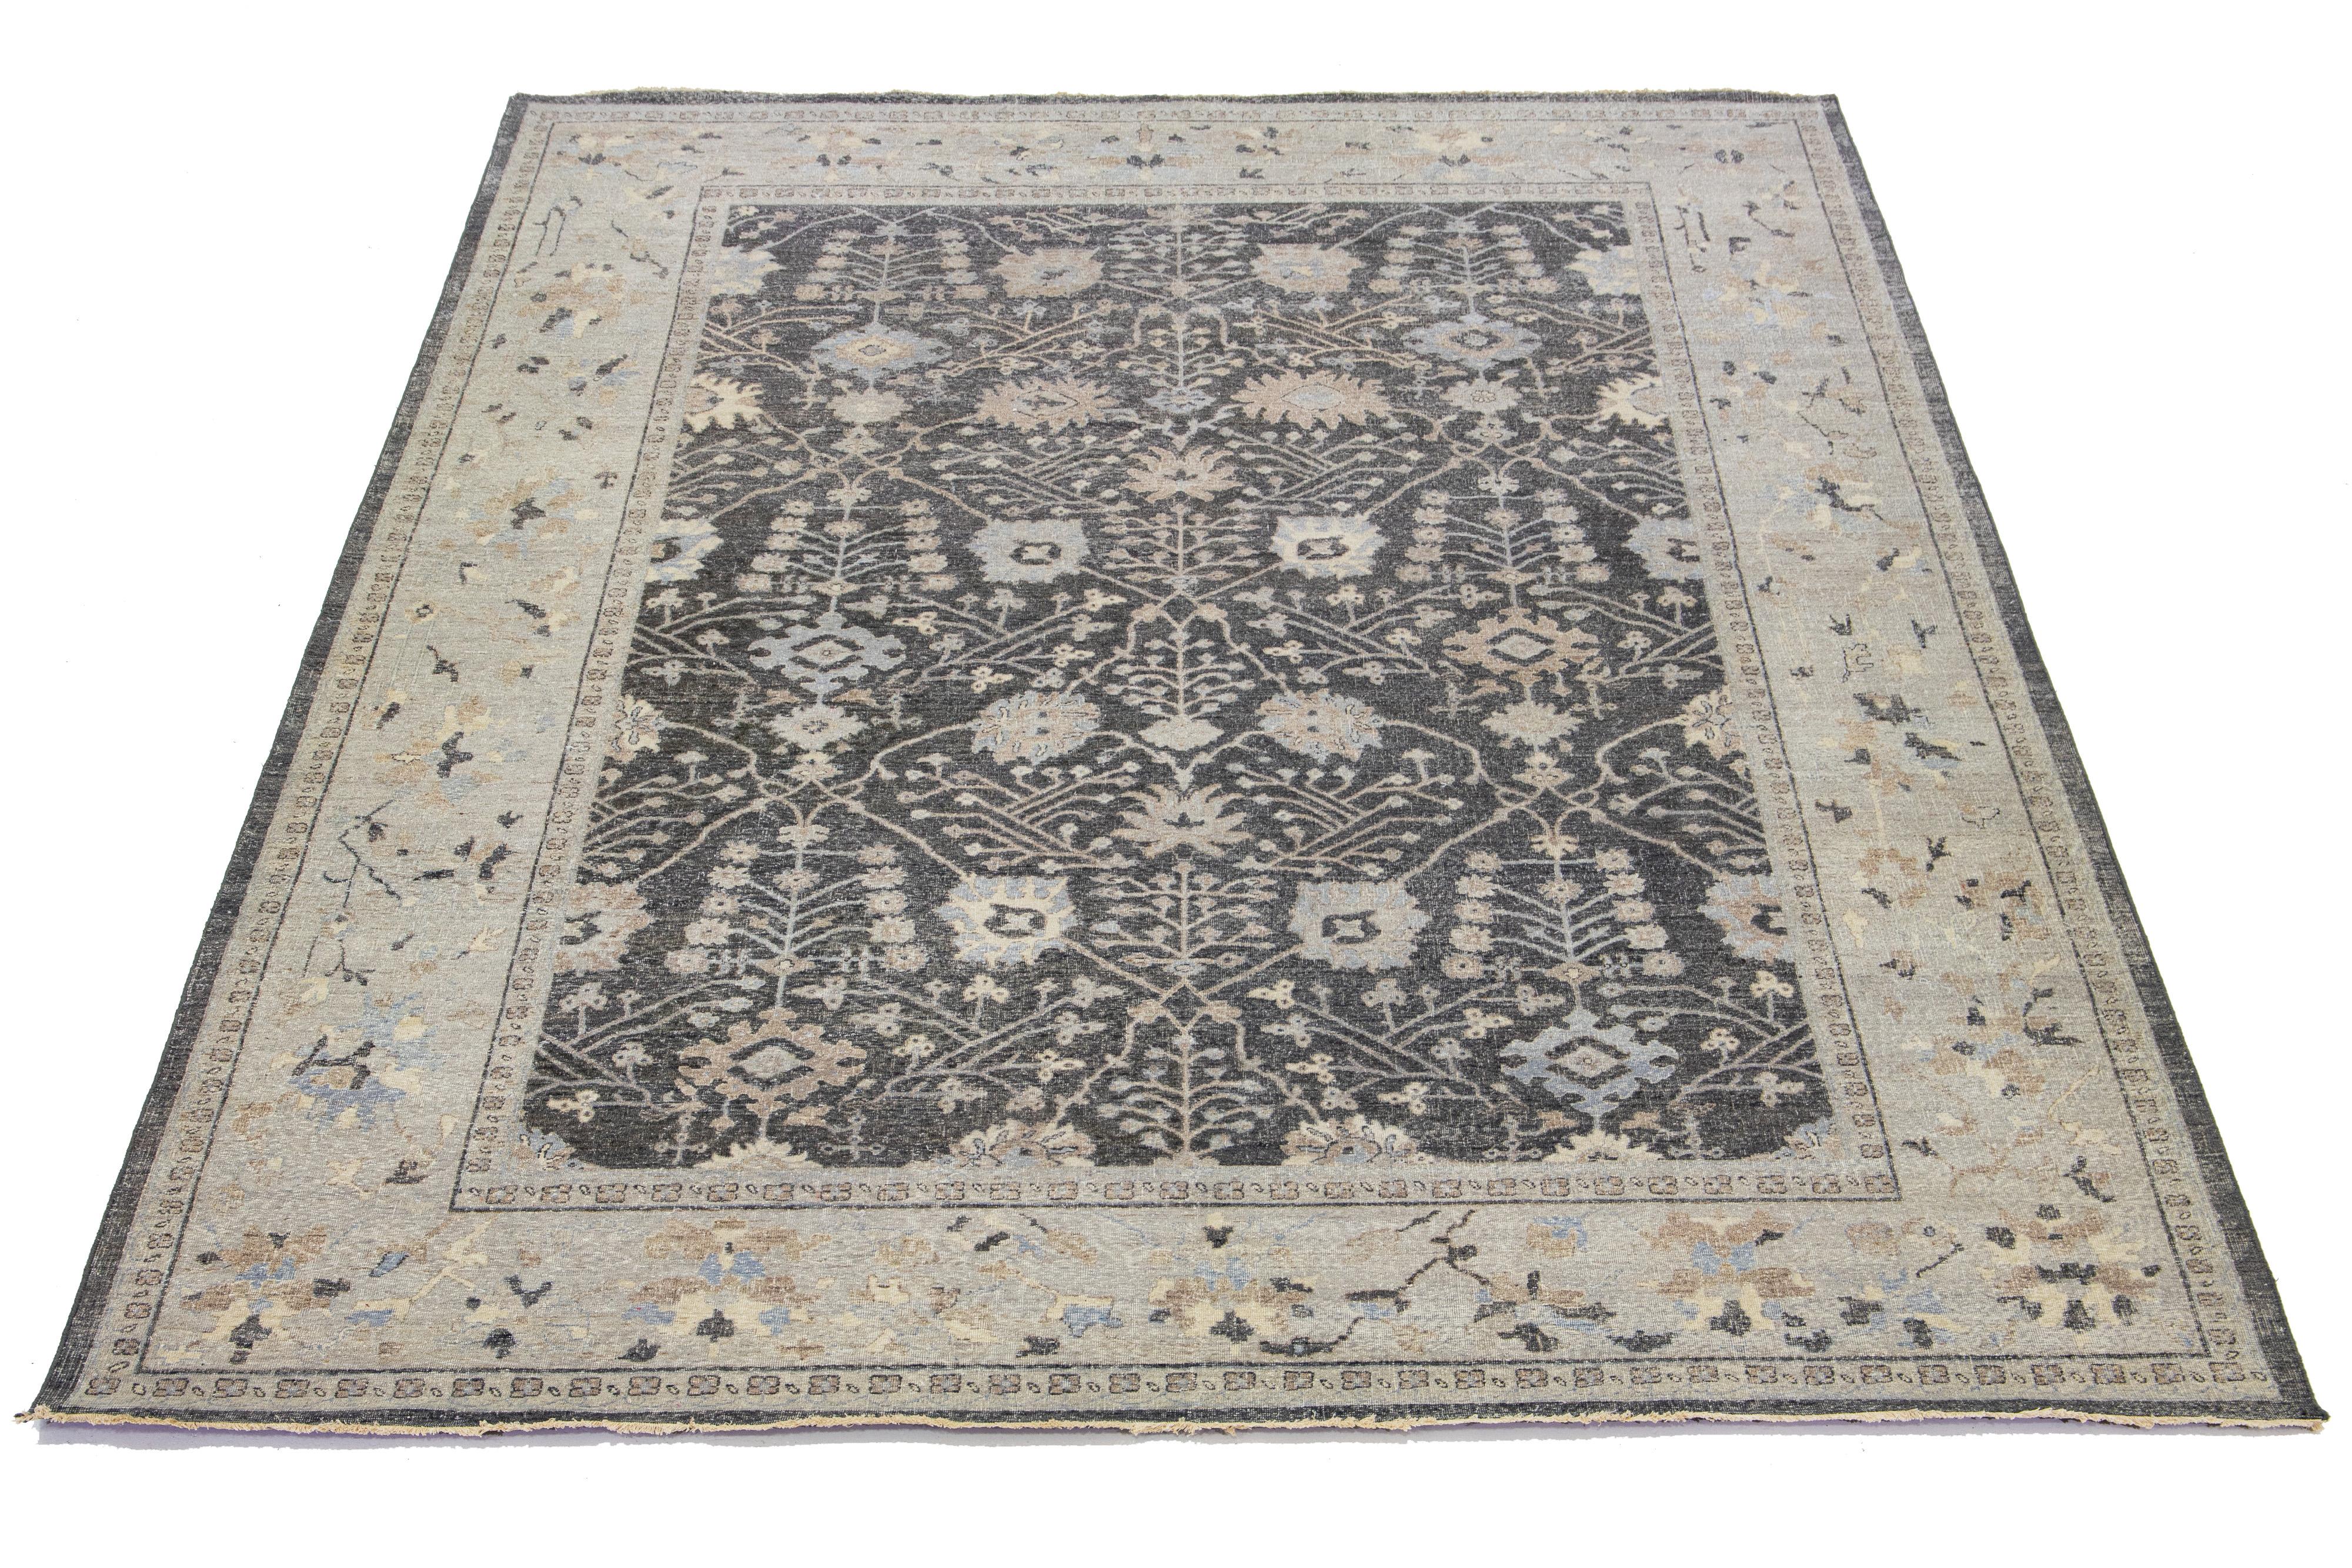 The Artisan line from Apadana adds a lovely antique touch to any room. This hand-knotted rug displays an enchanting all-over floral design, featuring a charcoal-gray color palette with accents of beige and brown.

This rug measures 9' 11